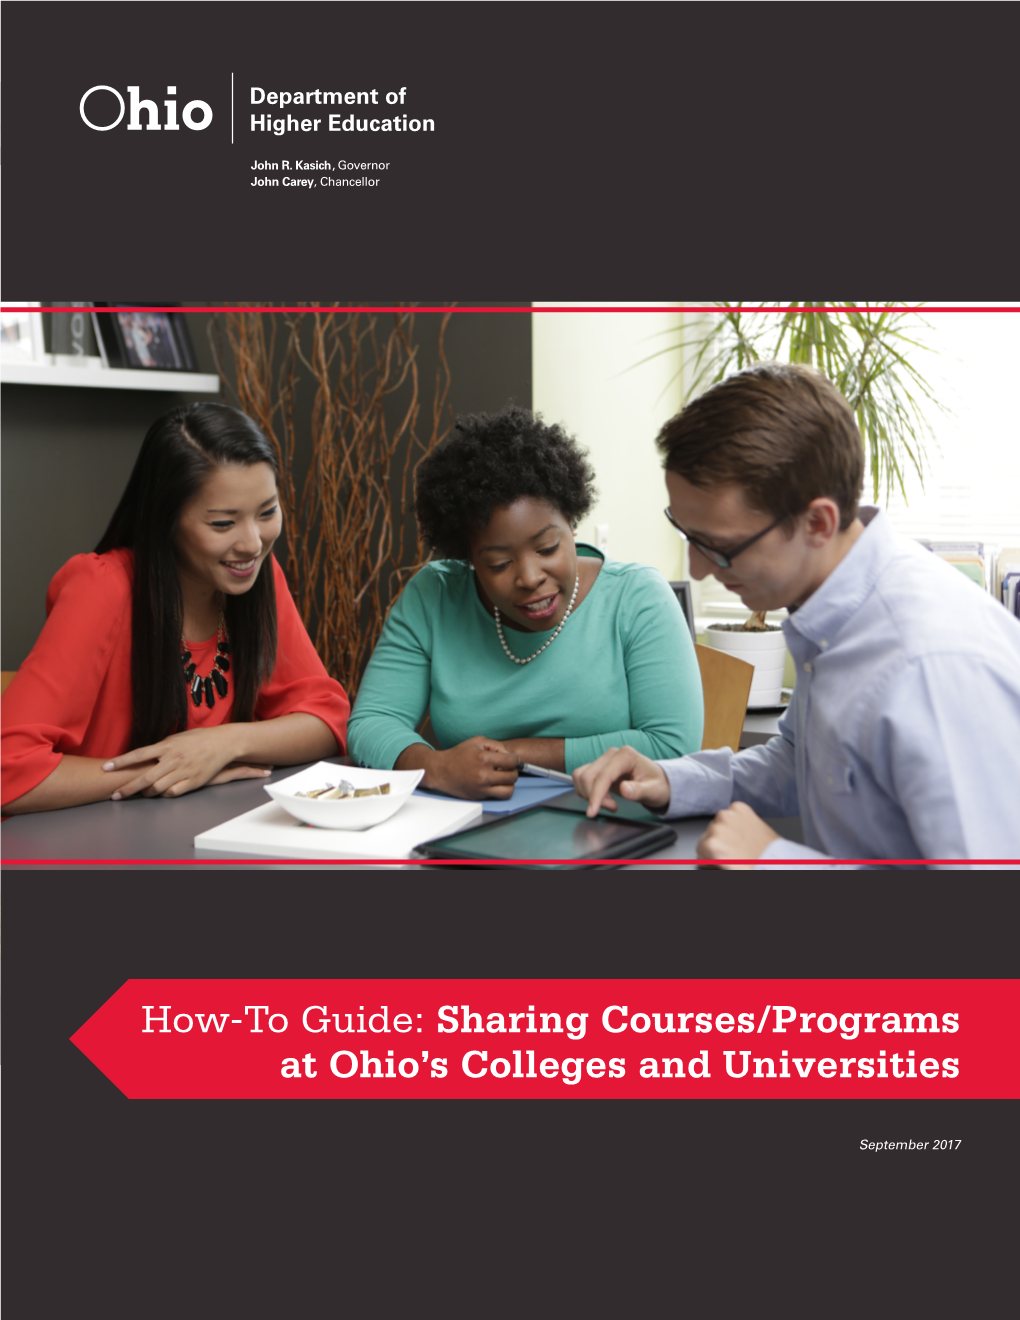 How-To Guide: Sharing Courses/Programs at Ohio's Colleges and Universities